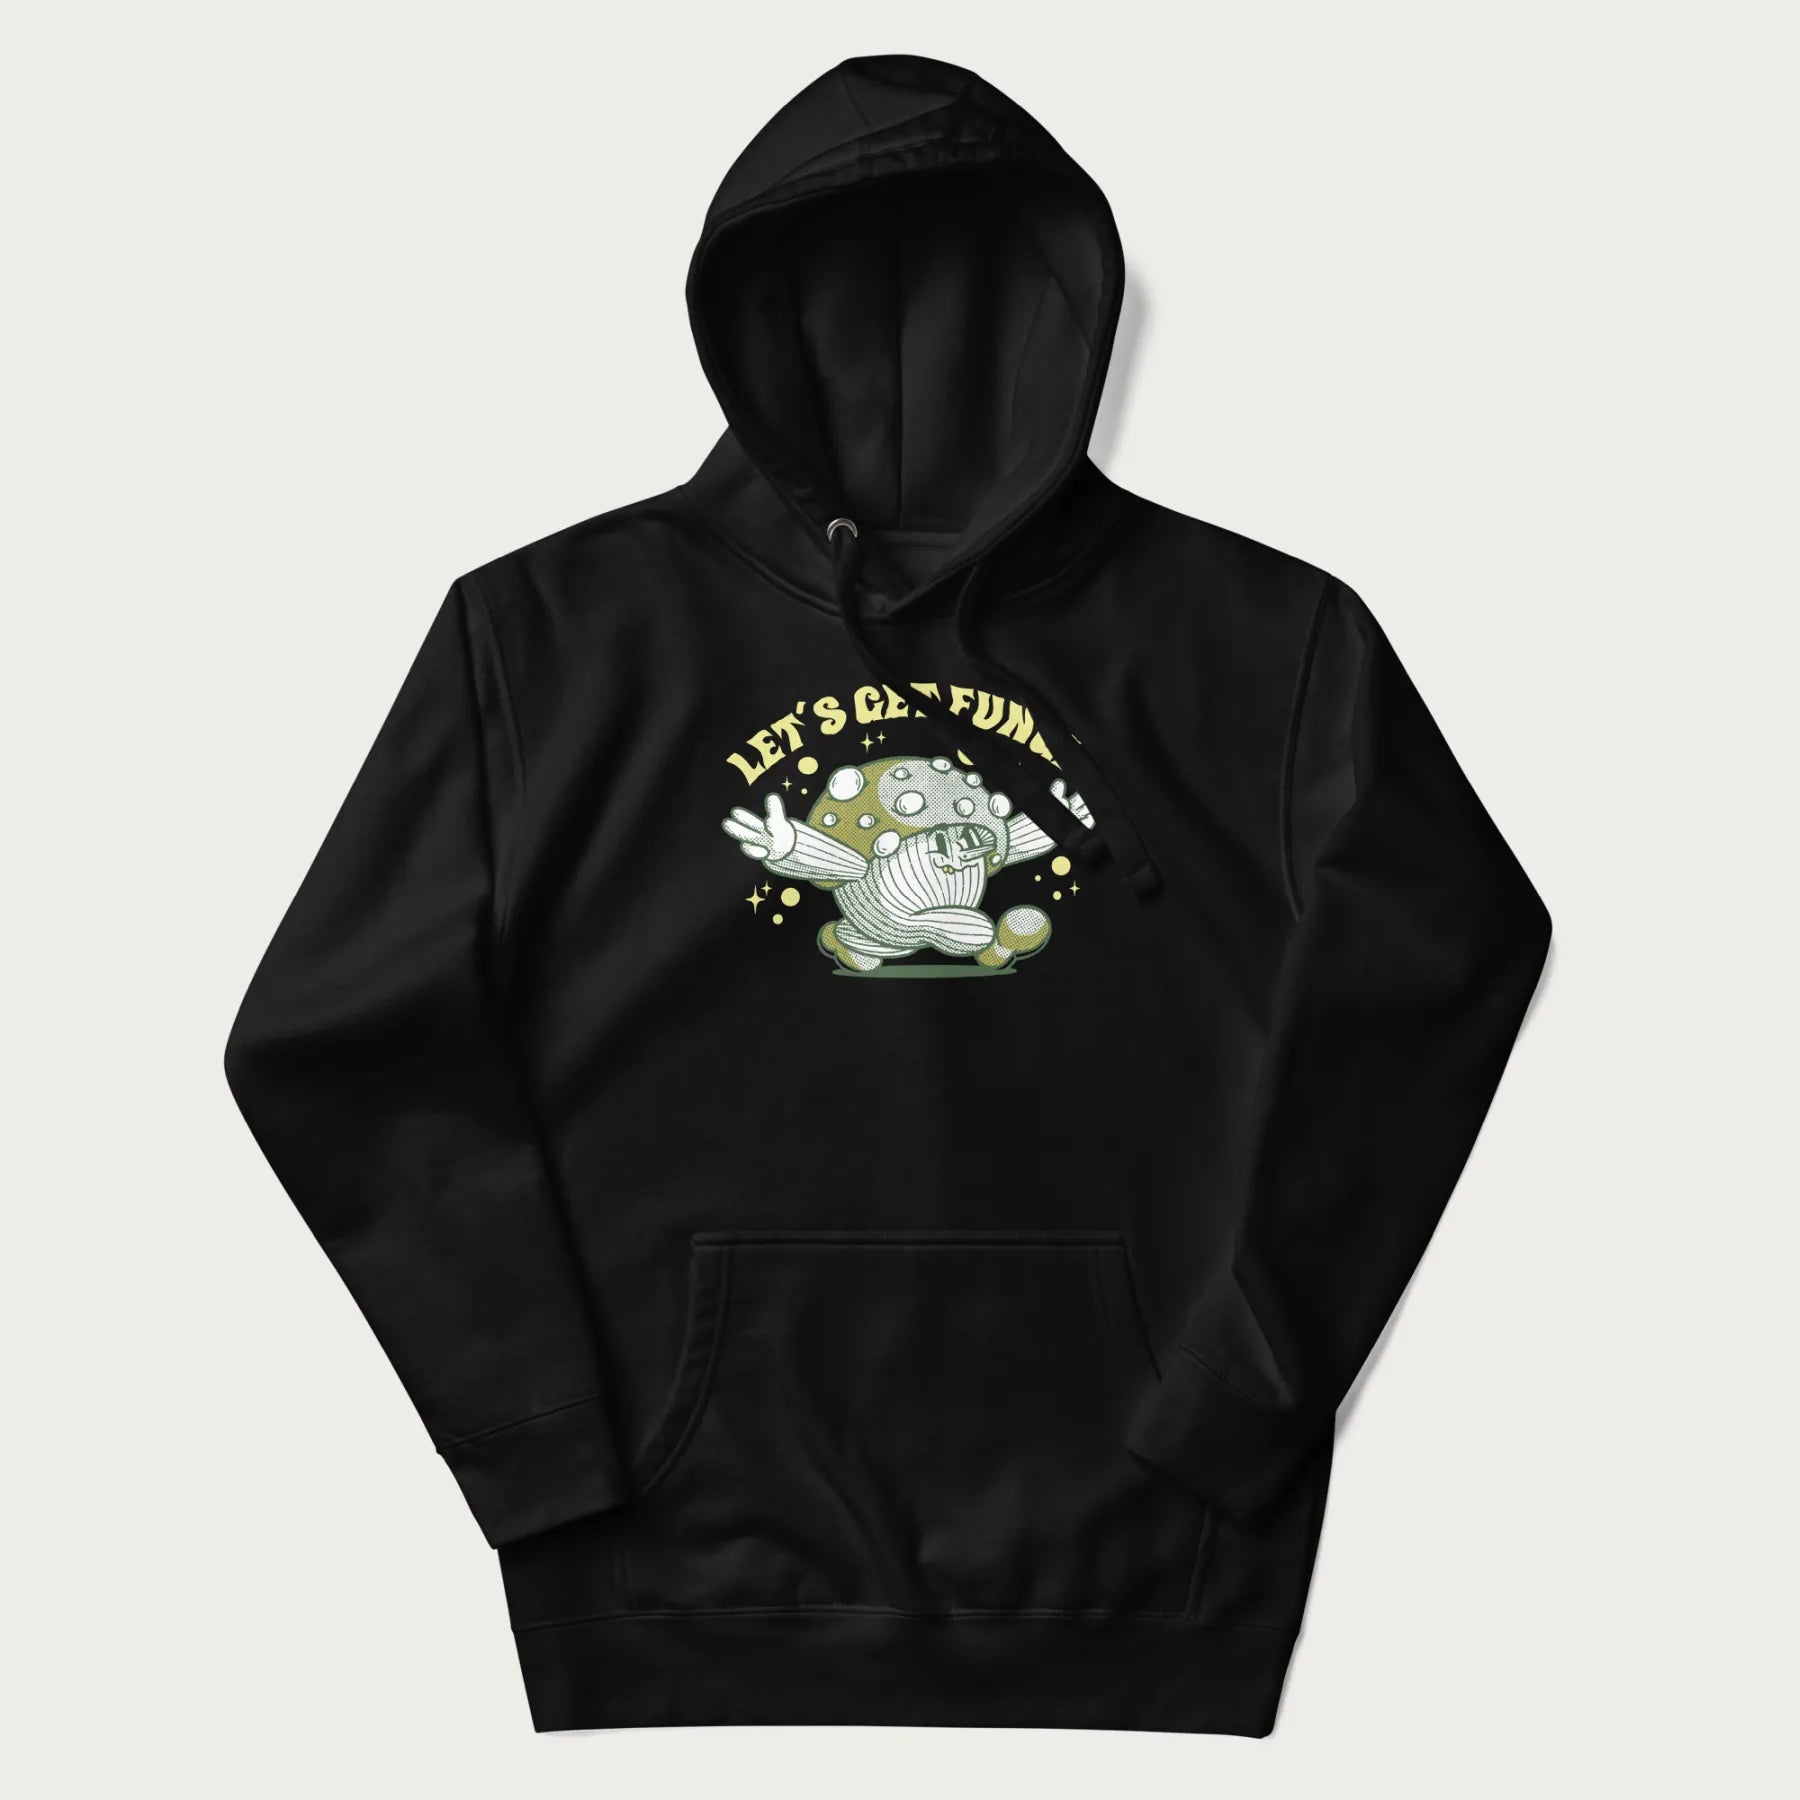 Black hoodie with a retro-inspired graphic of a mushroom mascot character and the text 'Let's Get Fungi'.